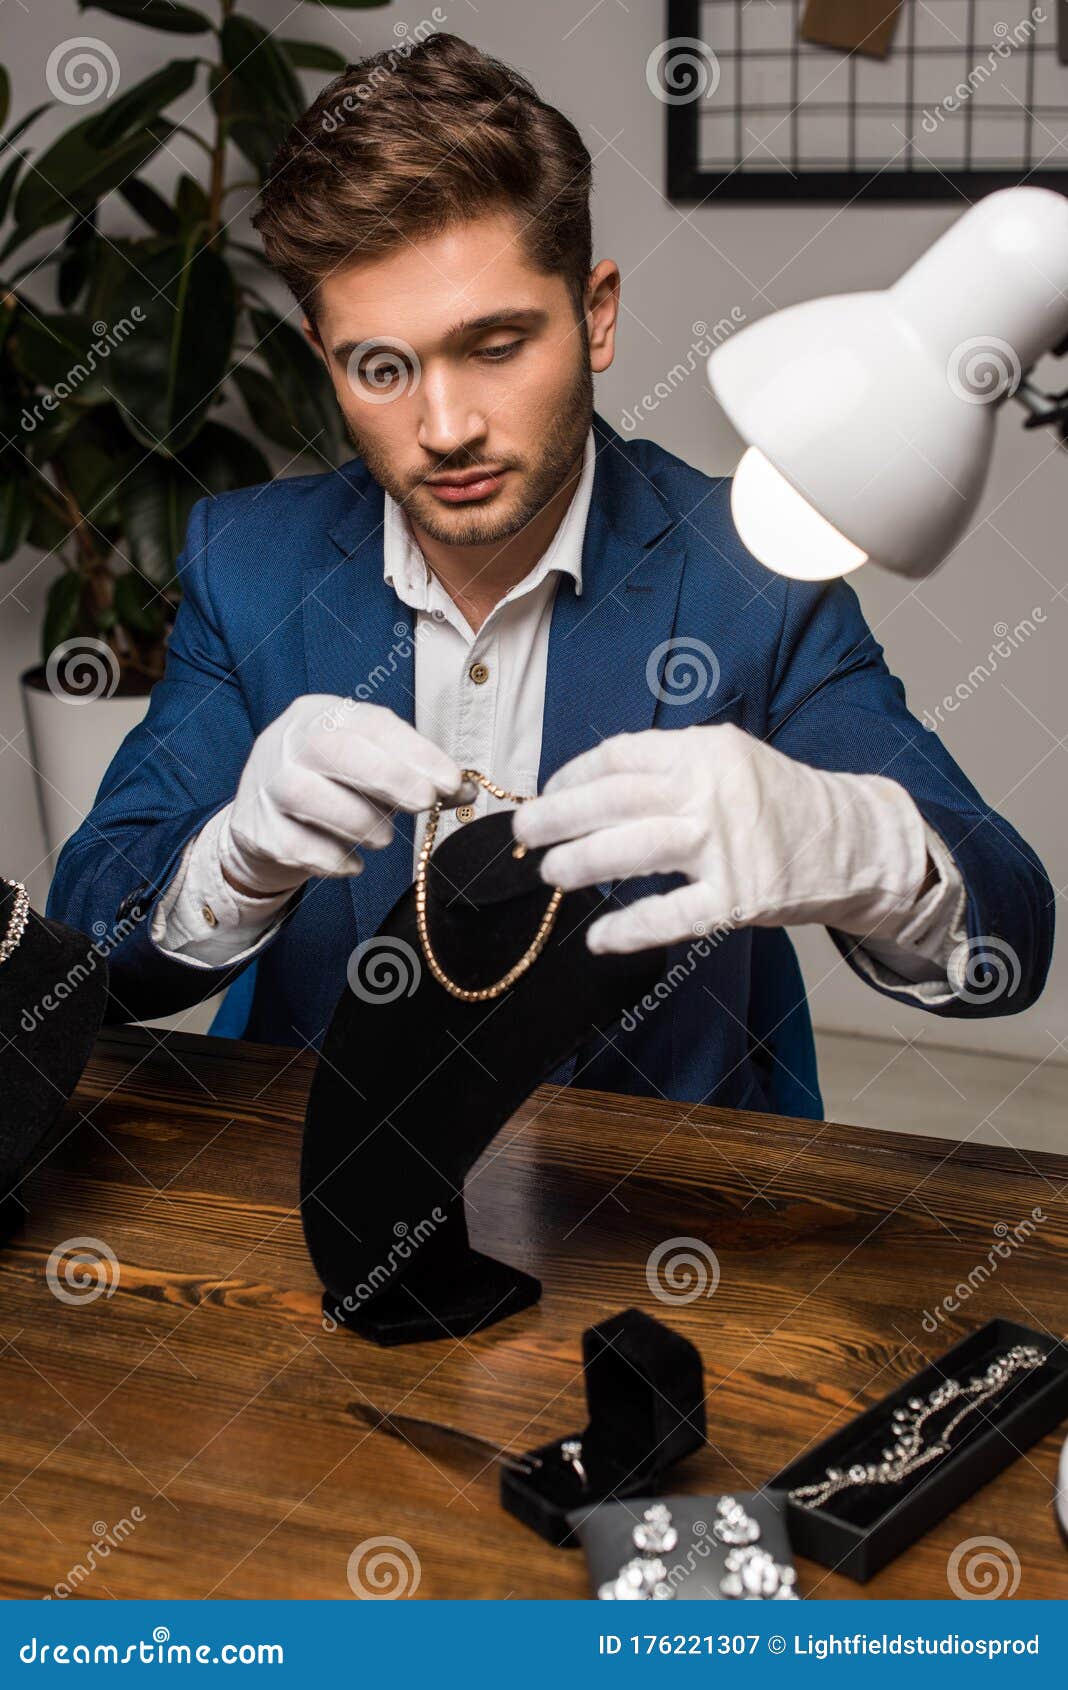 Jewelry Appraiser In Gloves Holding Necklace Stock Image ...